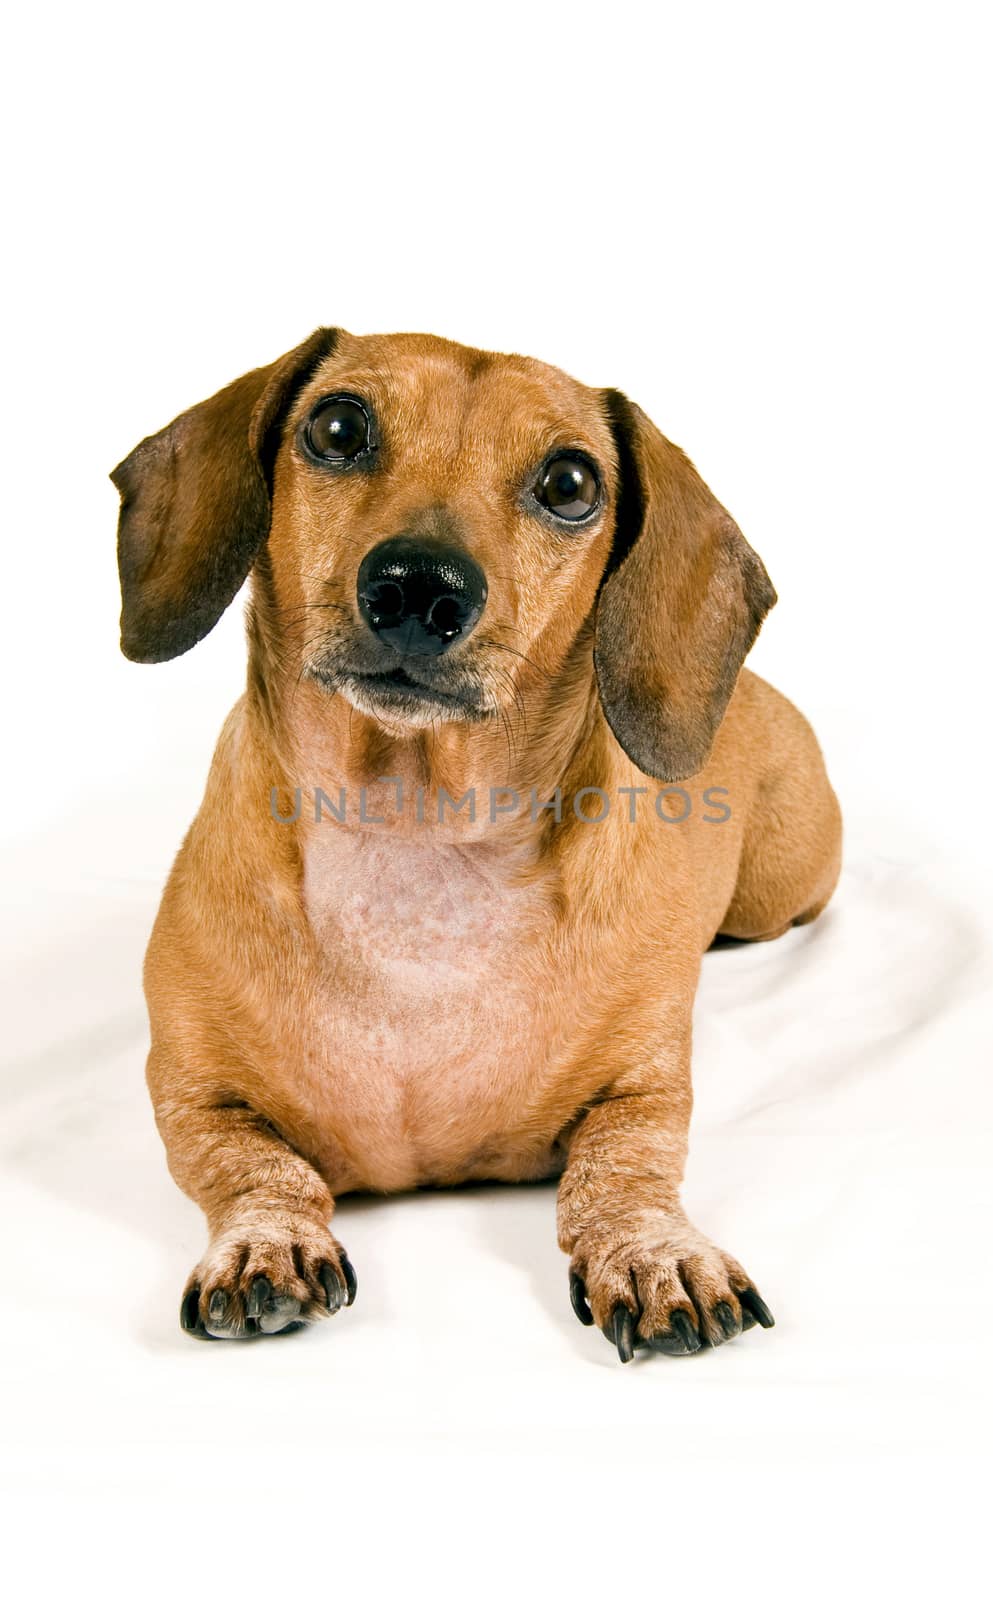 Miniature dachshund dog on white background looking curious